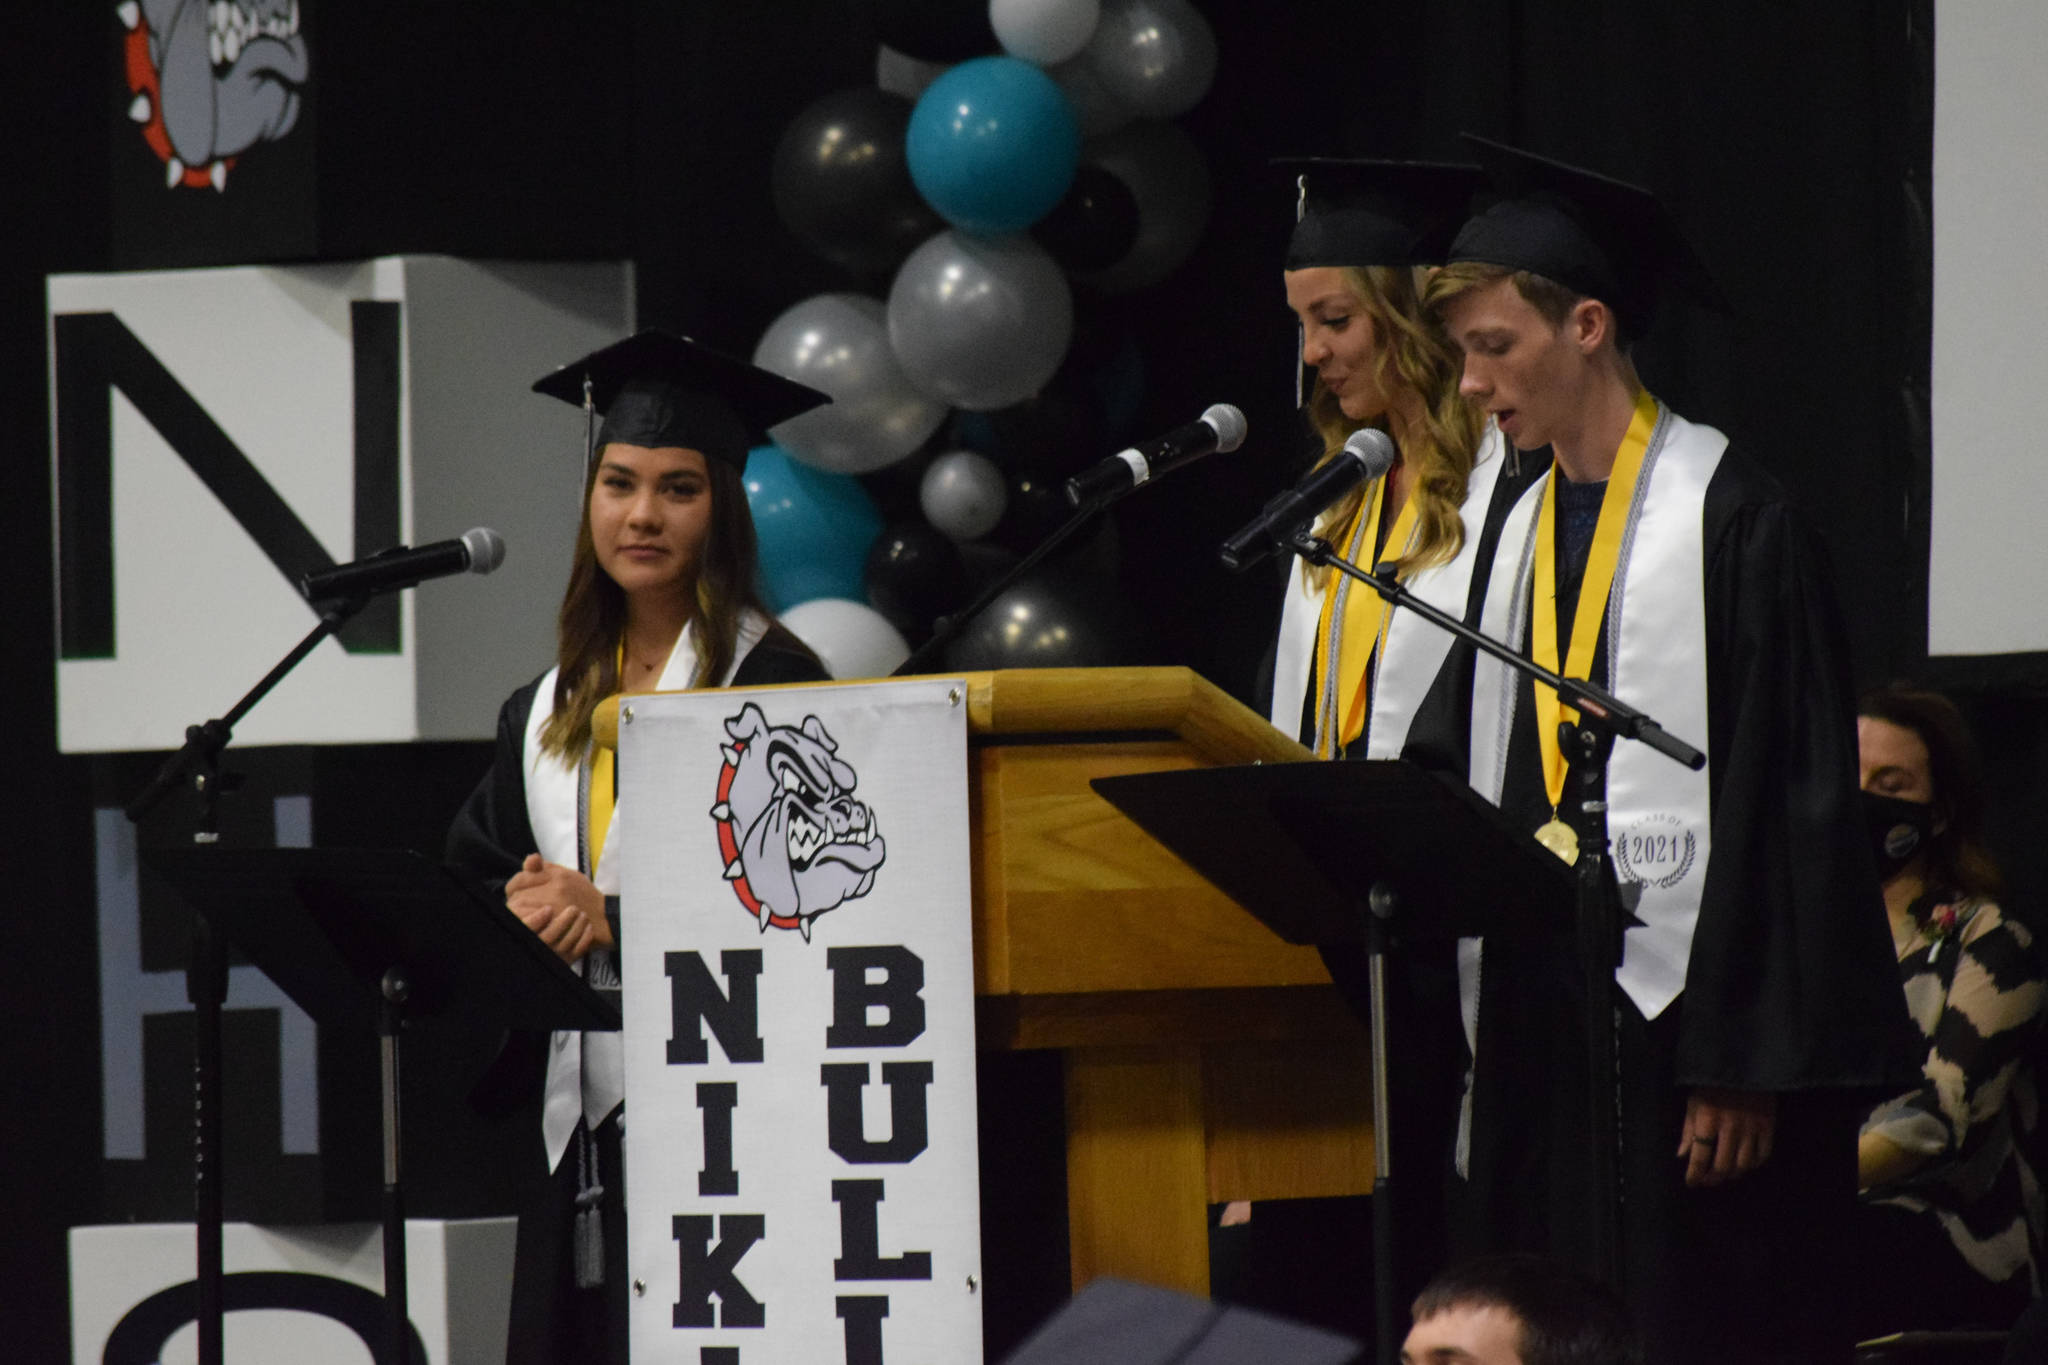 Valedictorians Rosalie Anderson, Lillian Carstens and Samuel Smith give their commencement address at the Nikiski Middle/High School graduation on Wednesday, May 19, 2021 in the gymnasium. (Camille Botello / Peninsula Clarion)